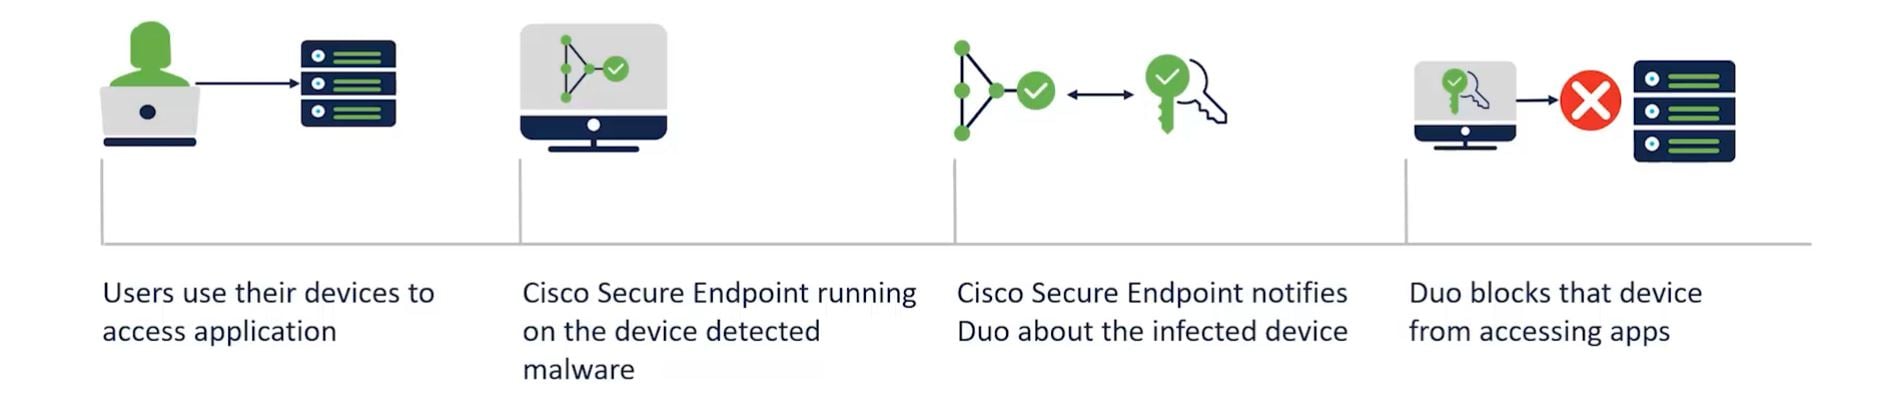 Duo Secure Endpoint